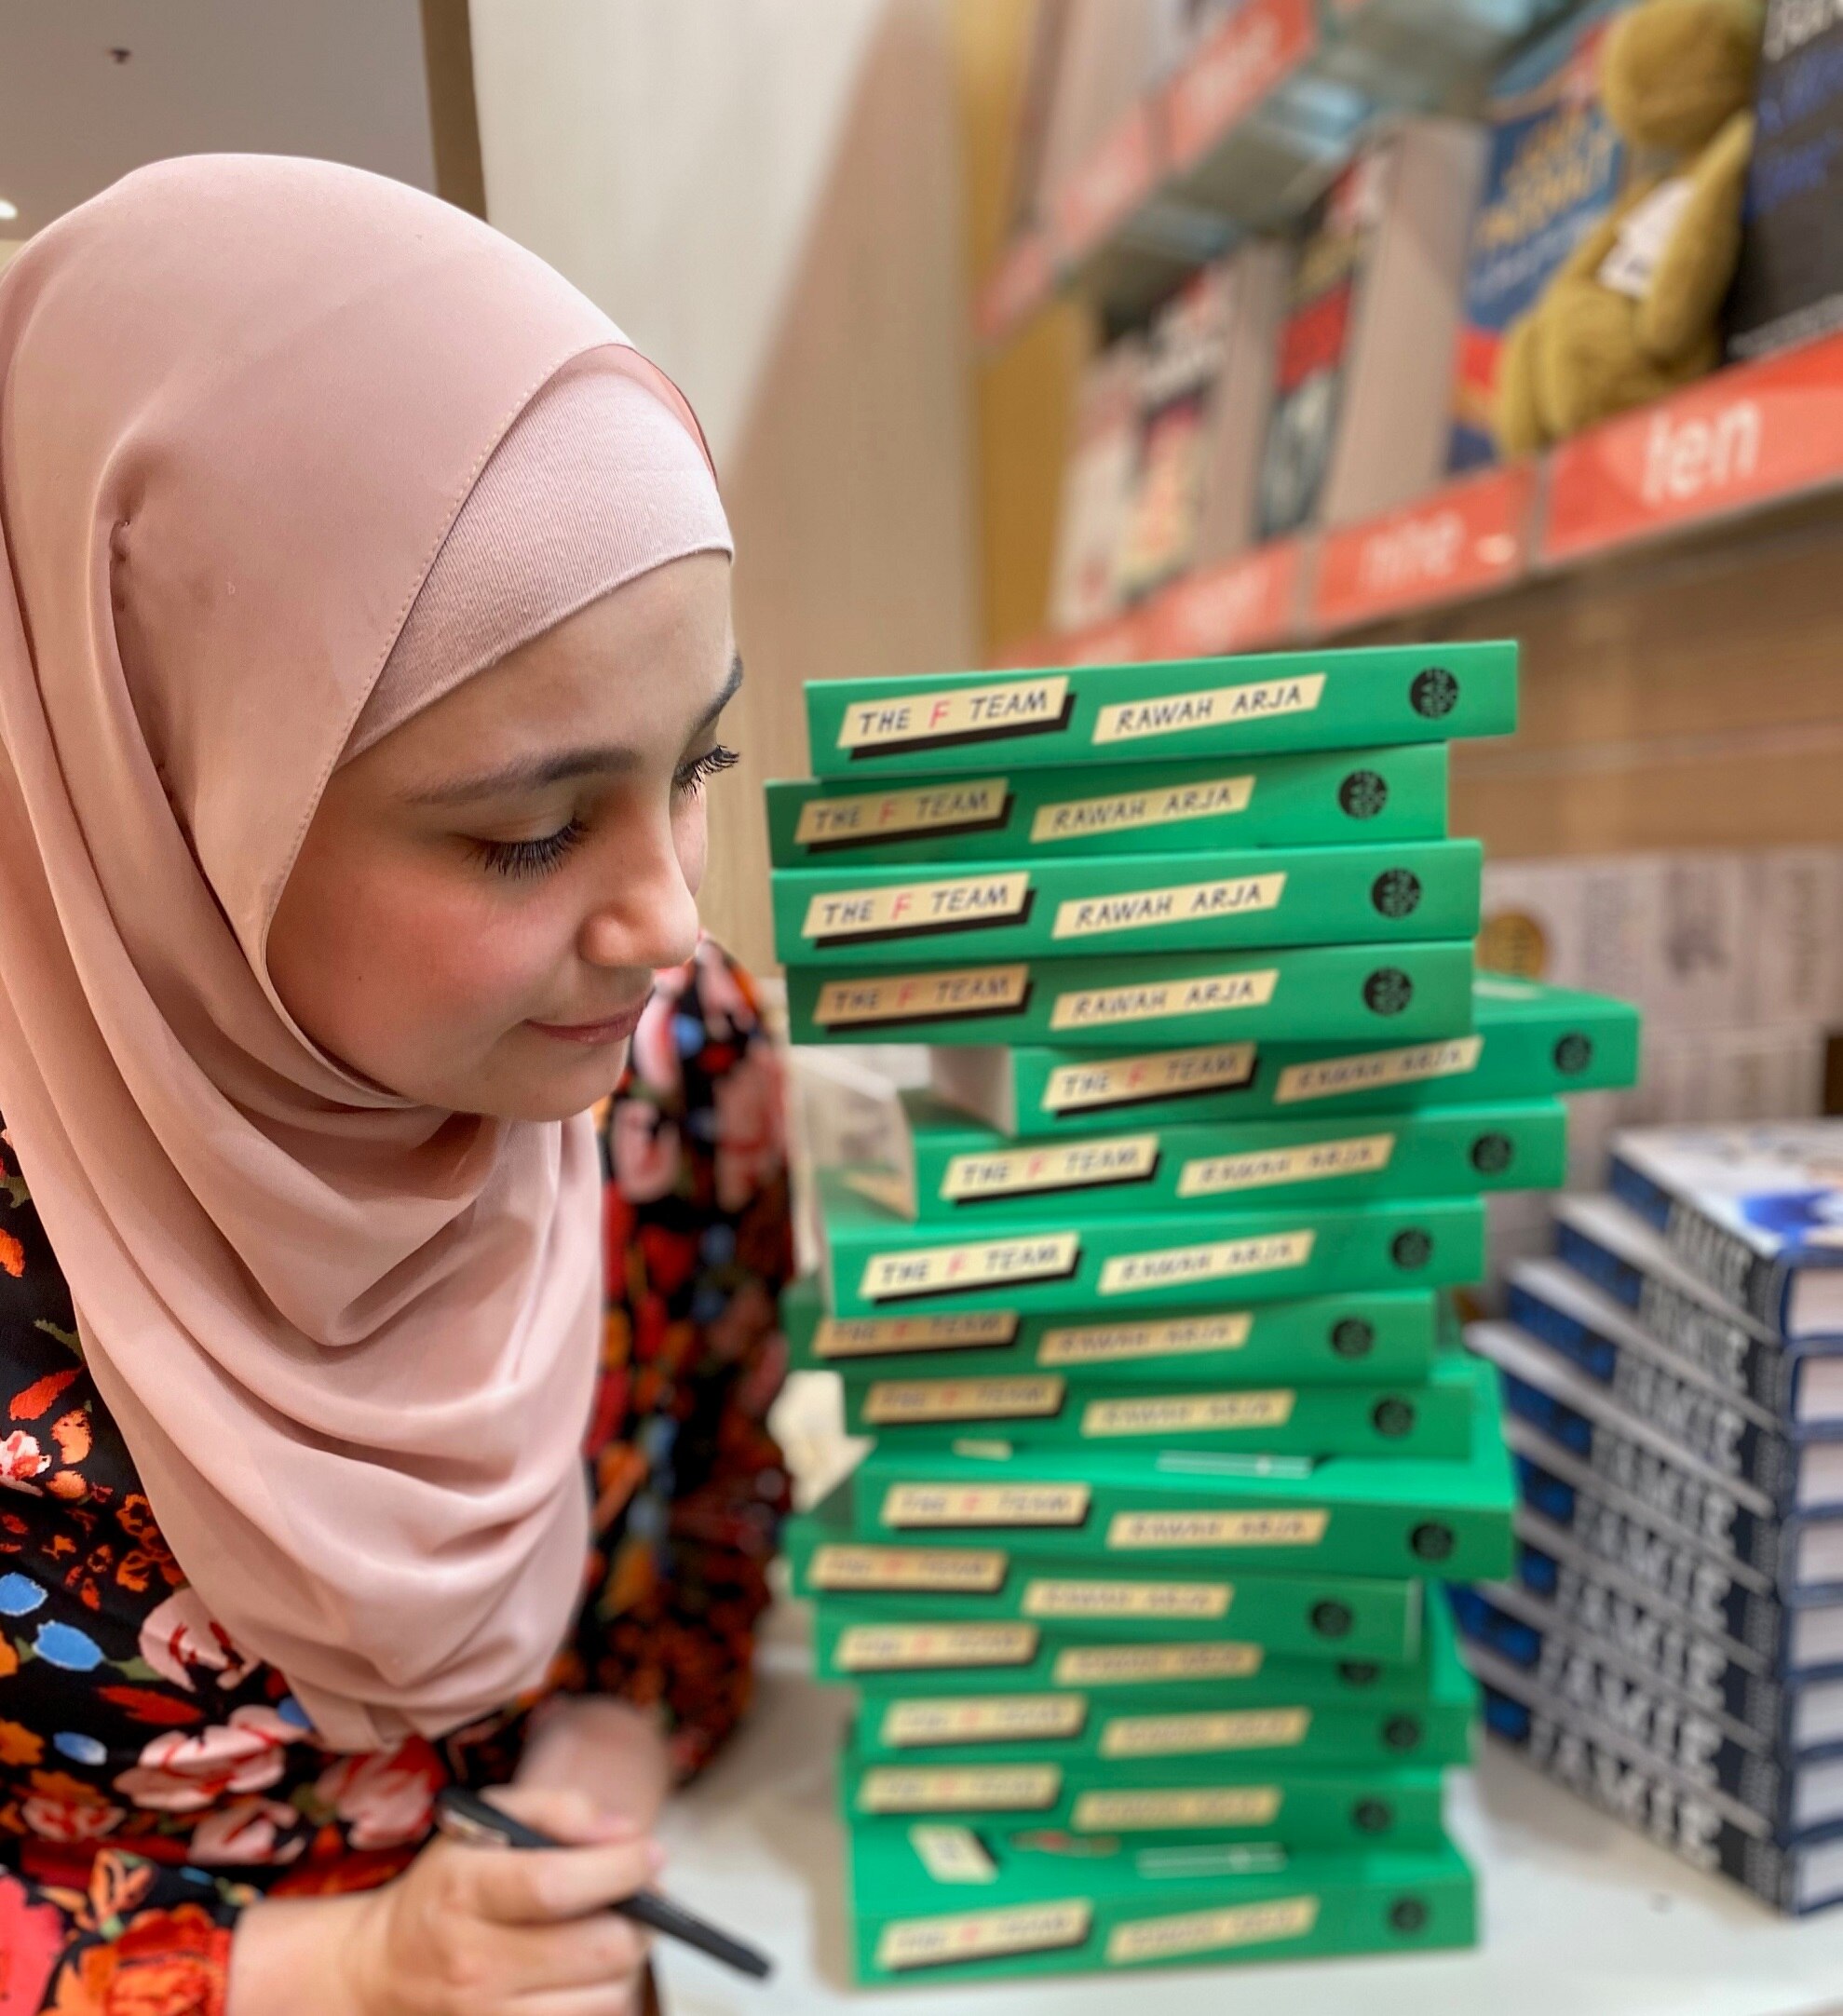 Growing up, Rawah Arja didn't think reading was for her - until she found stories that shared her experiences.